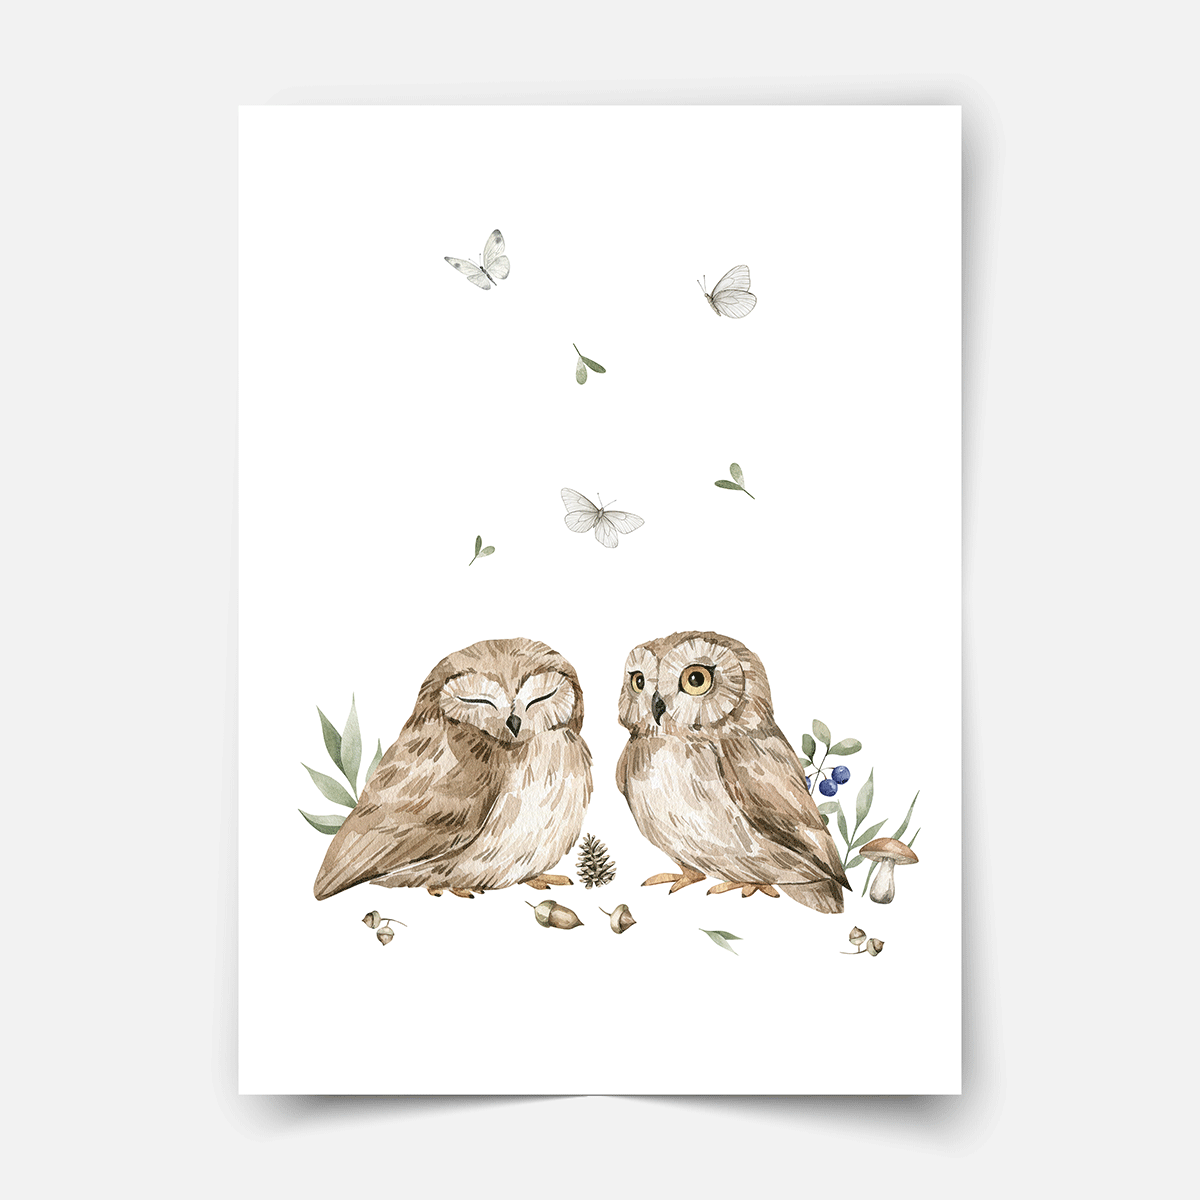 Woodland print - Magical forest - Owls